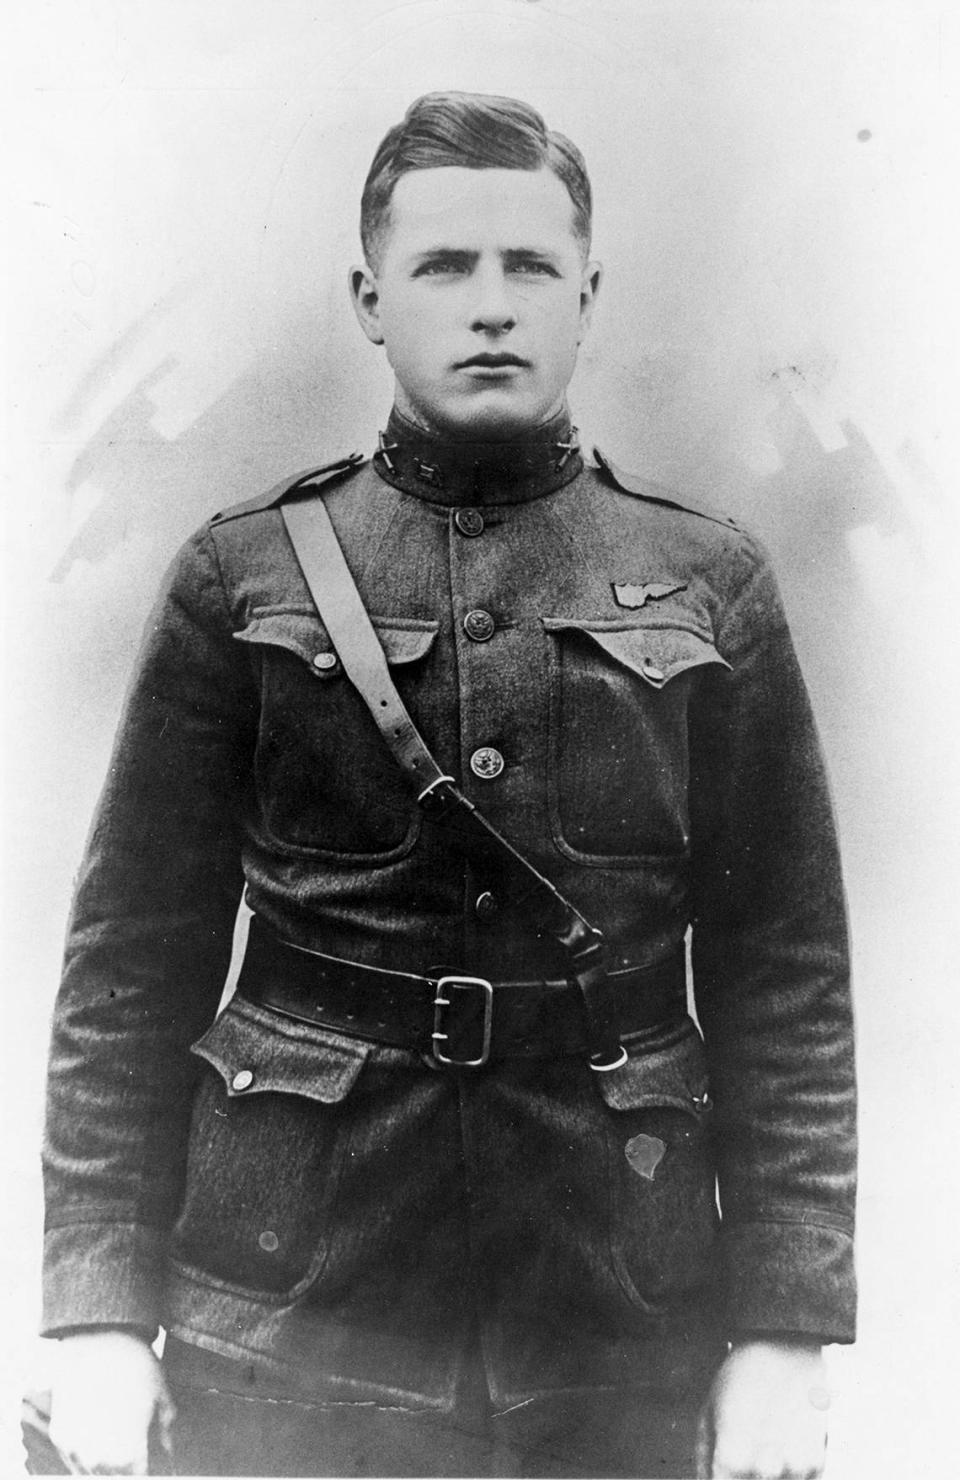 Erwin Bleckley was a First Lieutenant in the 50th Aero Squadron that searched for the Lost Battalion in the waning days of World War I.